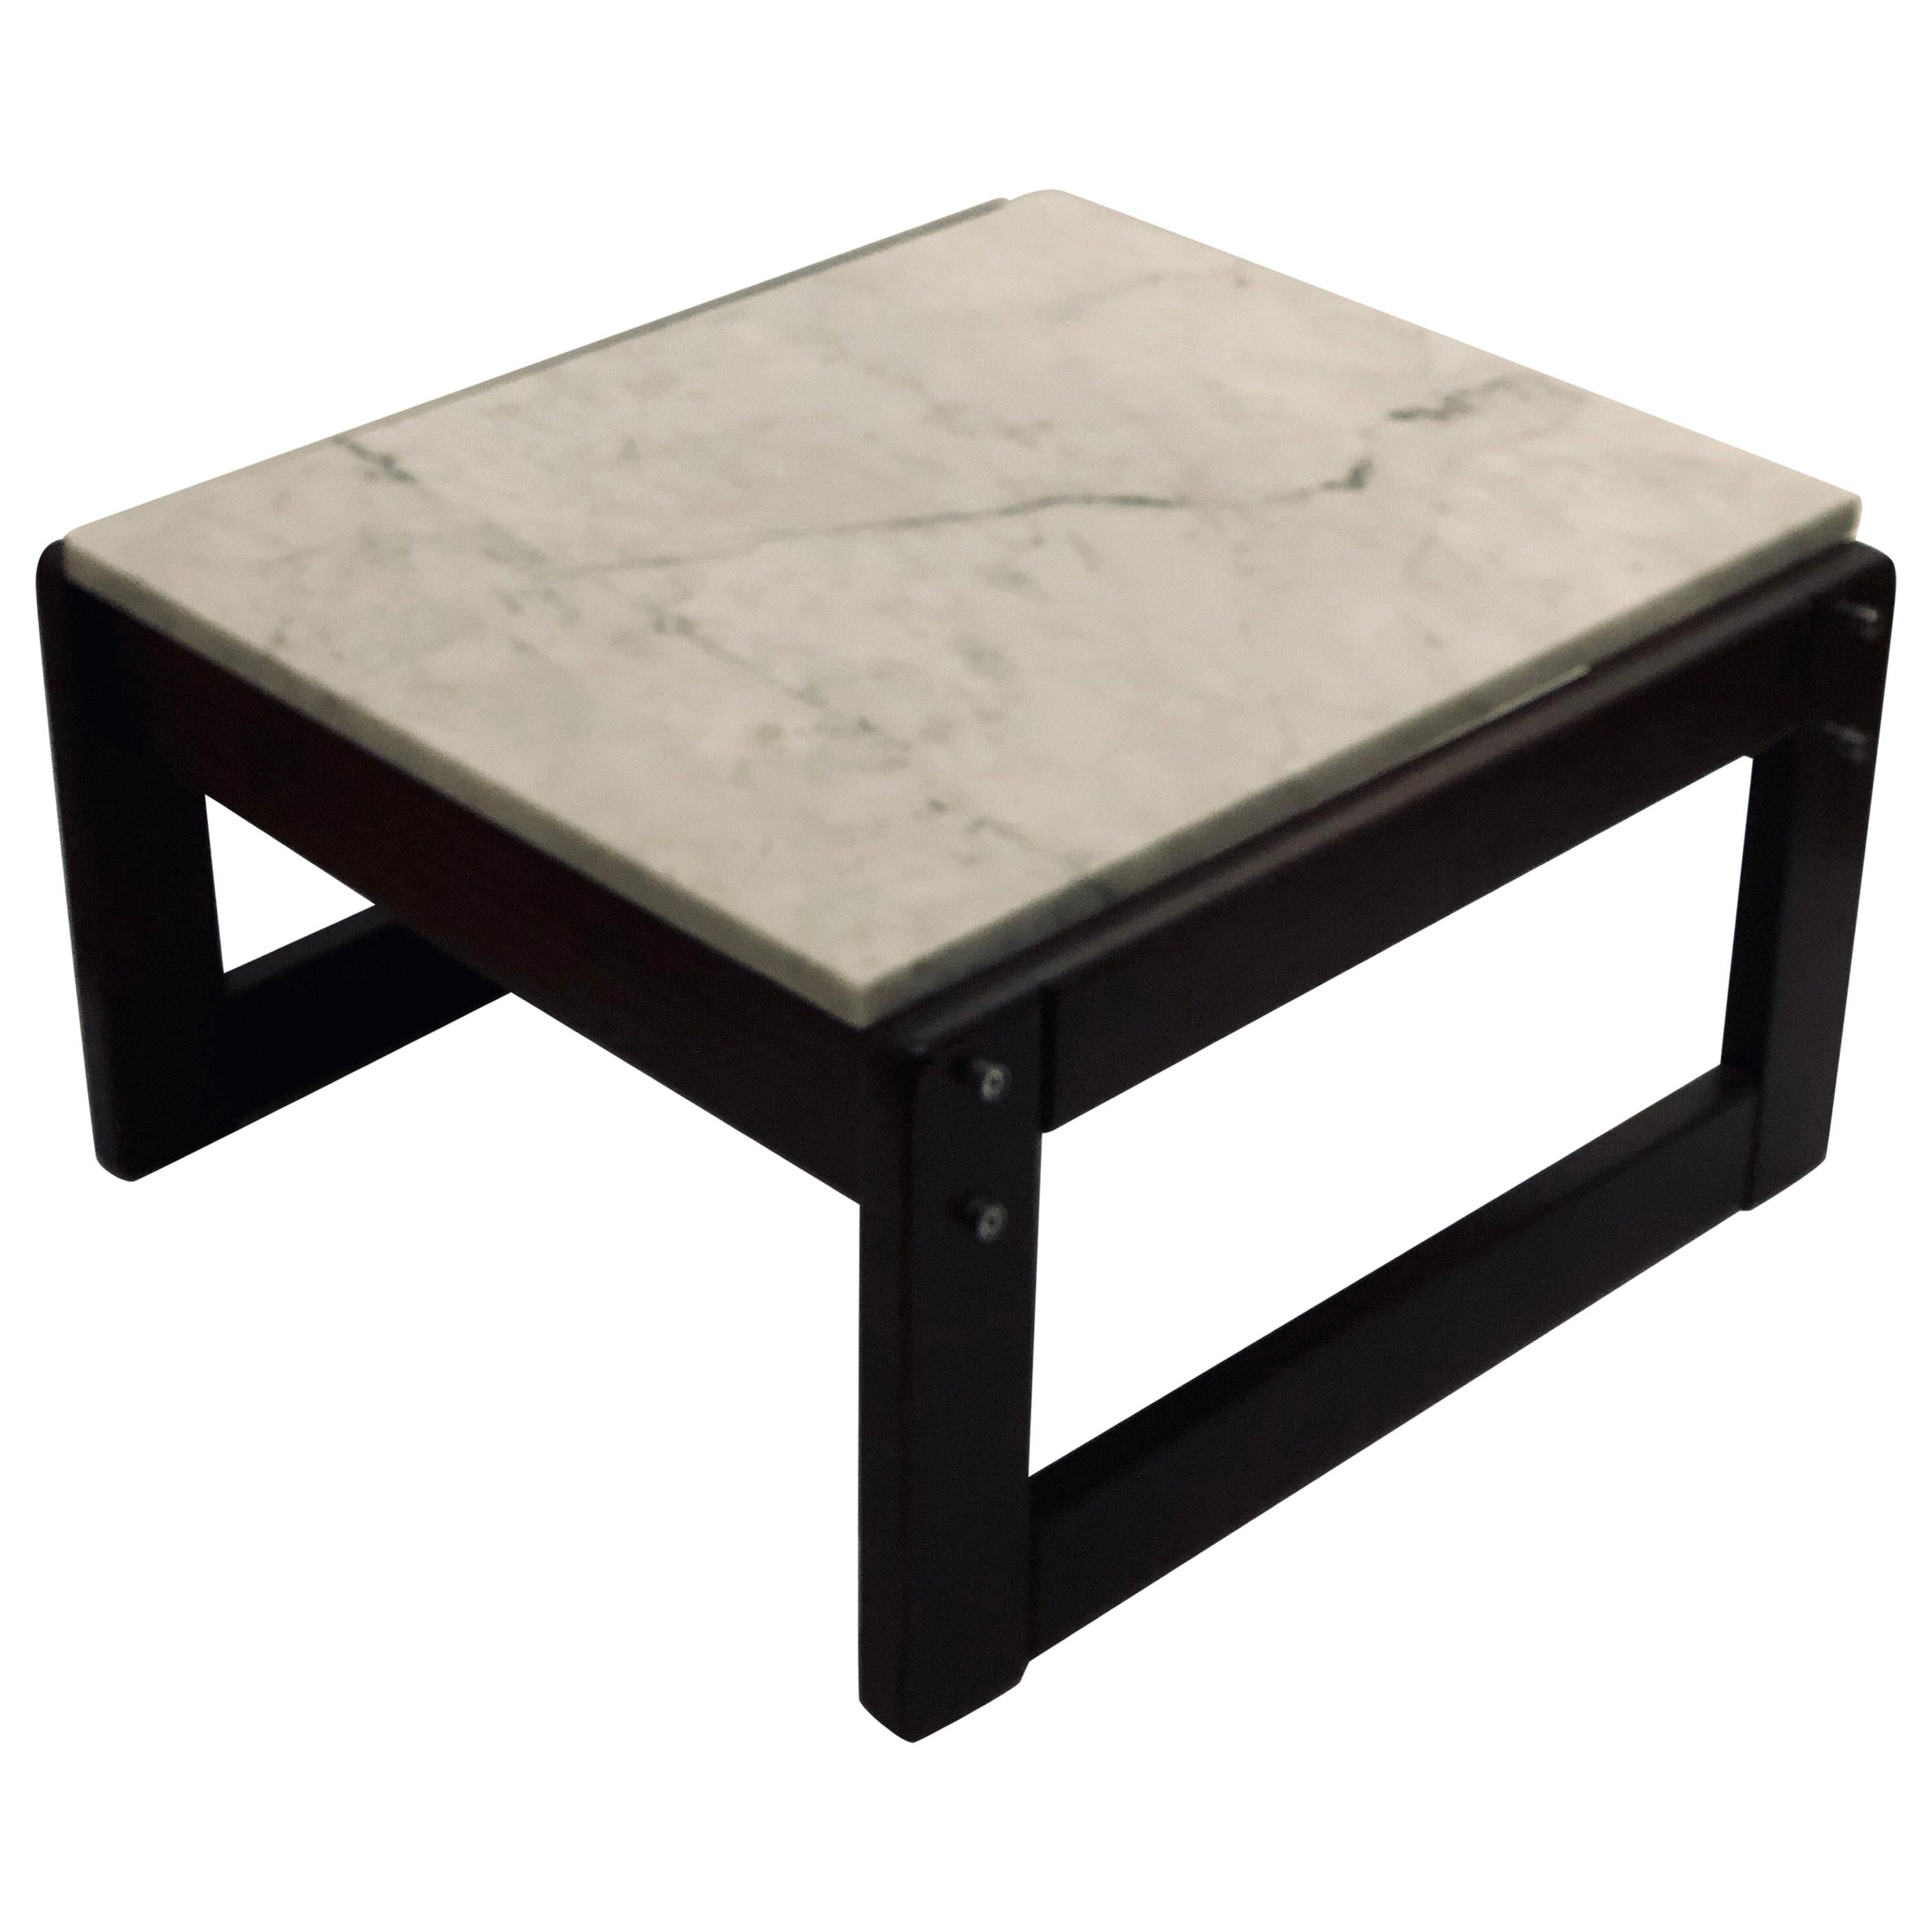 1970s Solid Wood Base on Italian Carrara Marble Cocktail Low Table by Lafer